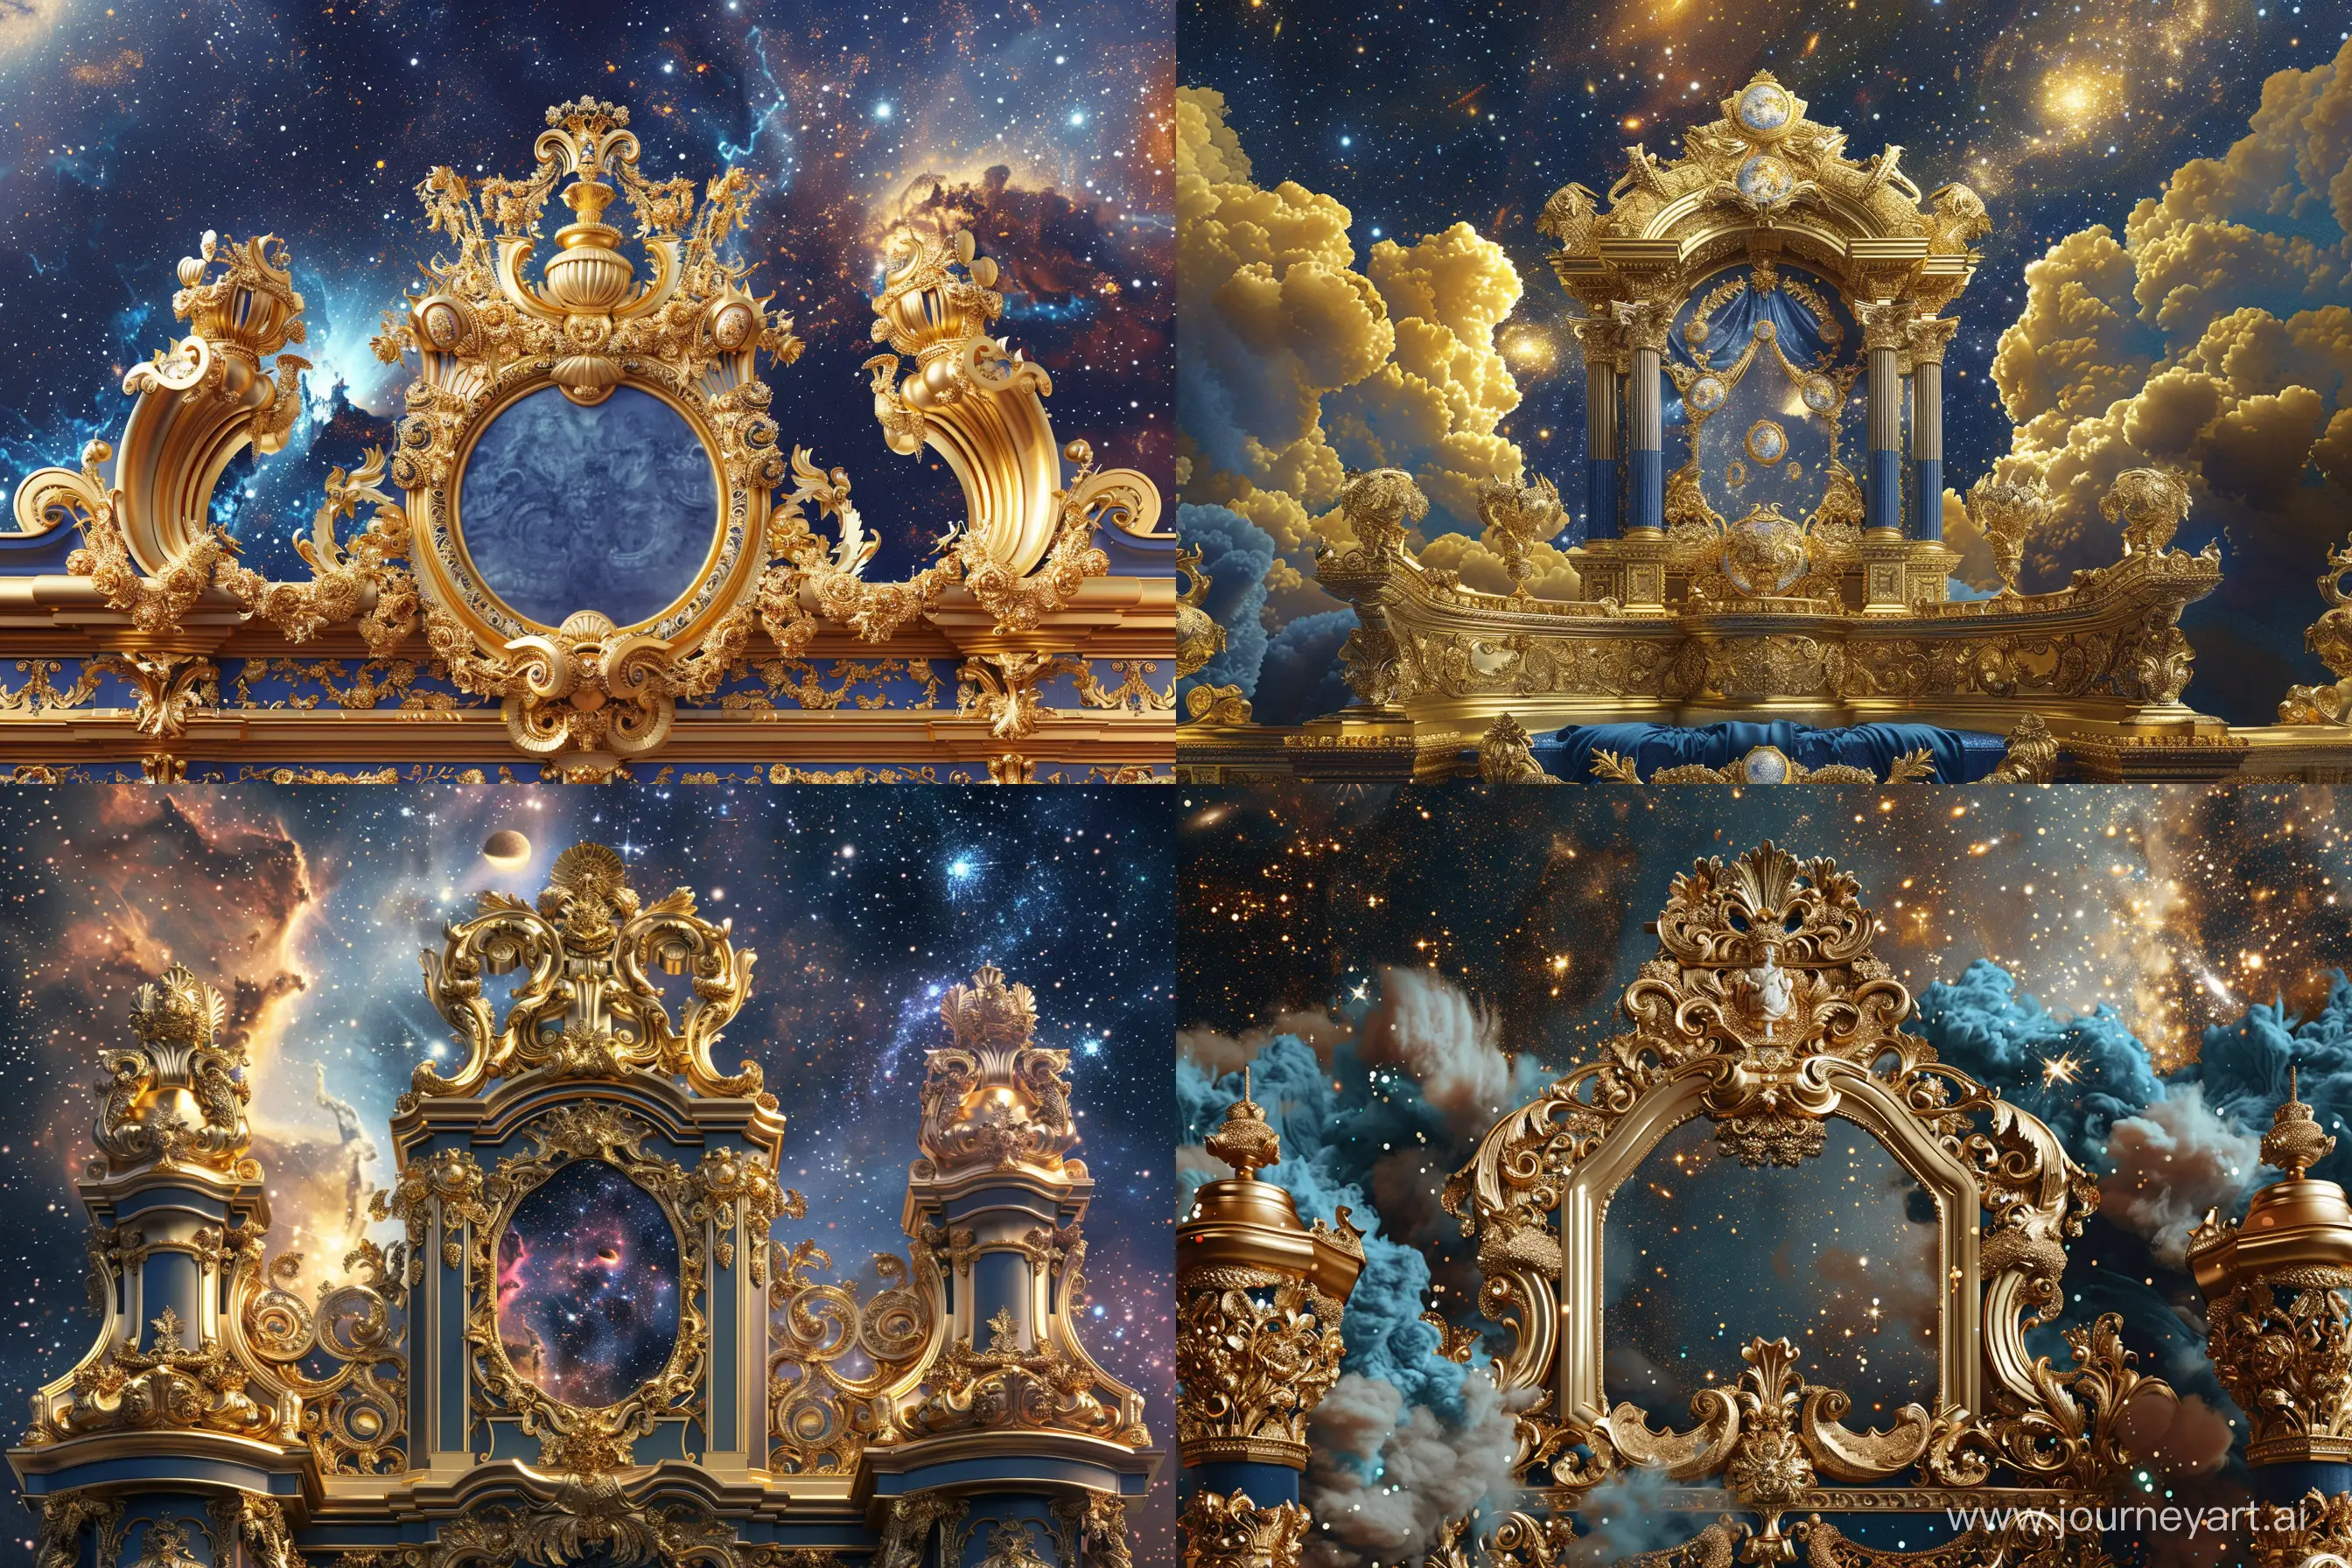 Extravagant-Celestial-Baroque-Royal-Court-with-Gold-and-Royal-Blue-Ornate-Details